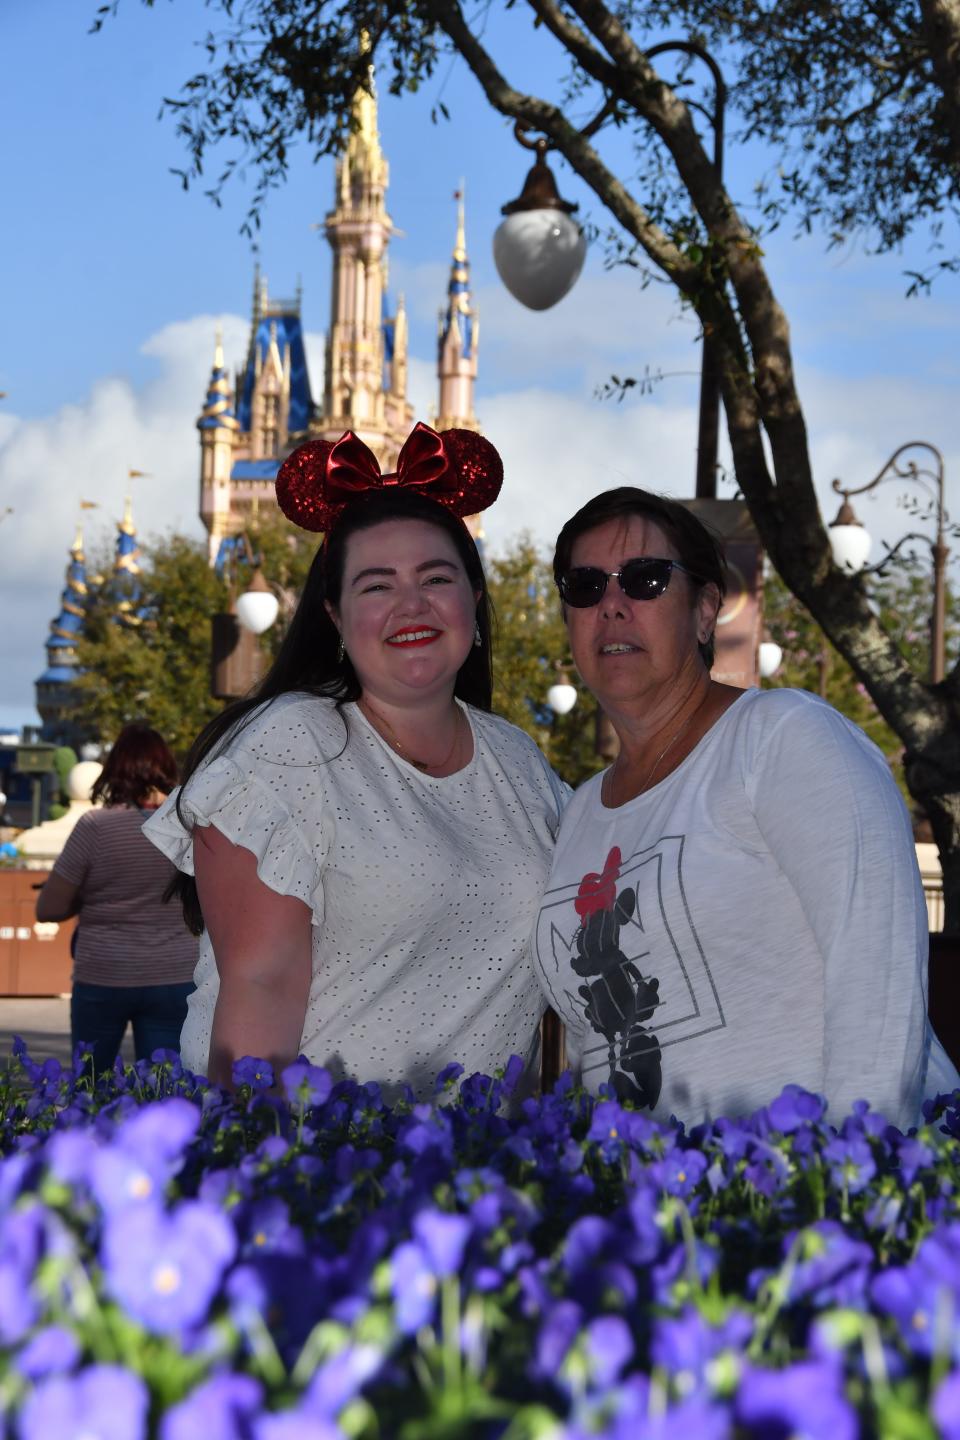 megan and her mom posing behind flowers at magic kingdom with the castle in the background